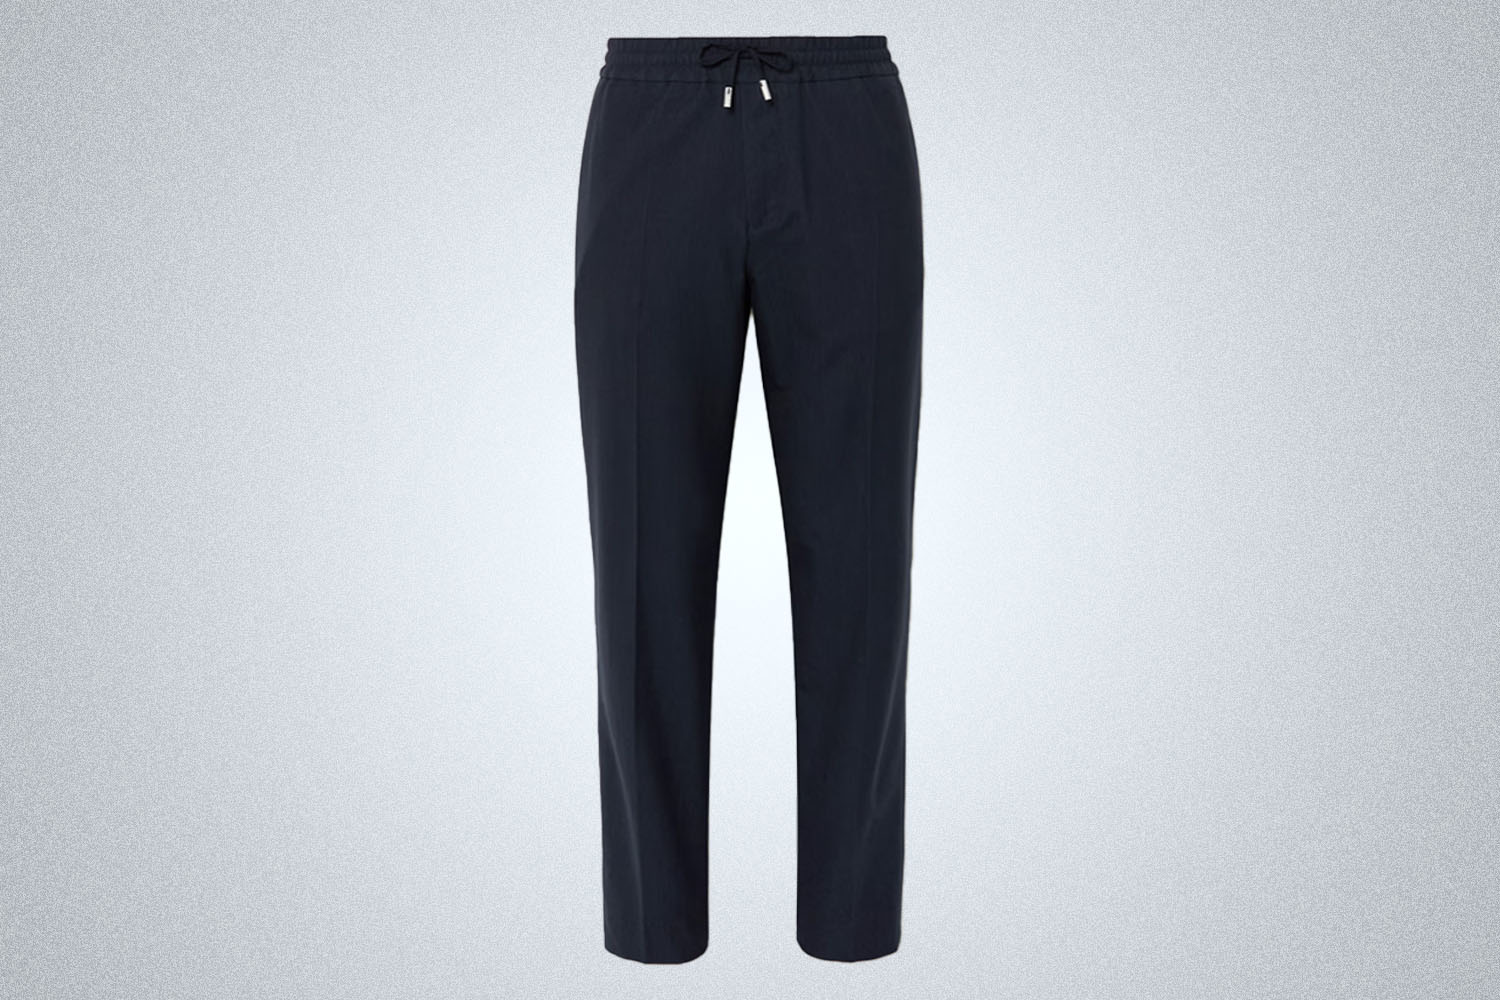 a pair of drawstring navy pants on a grey background